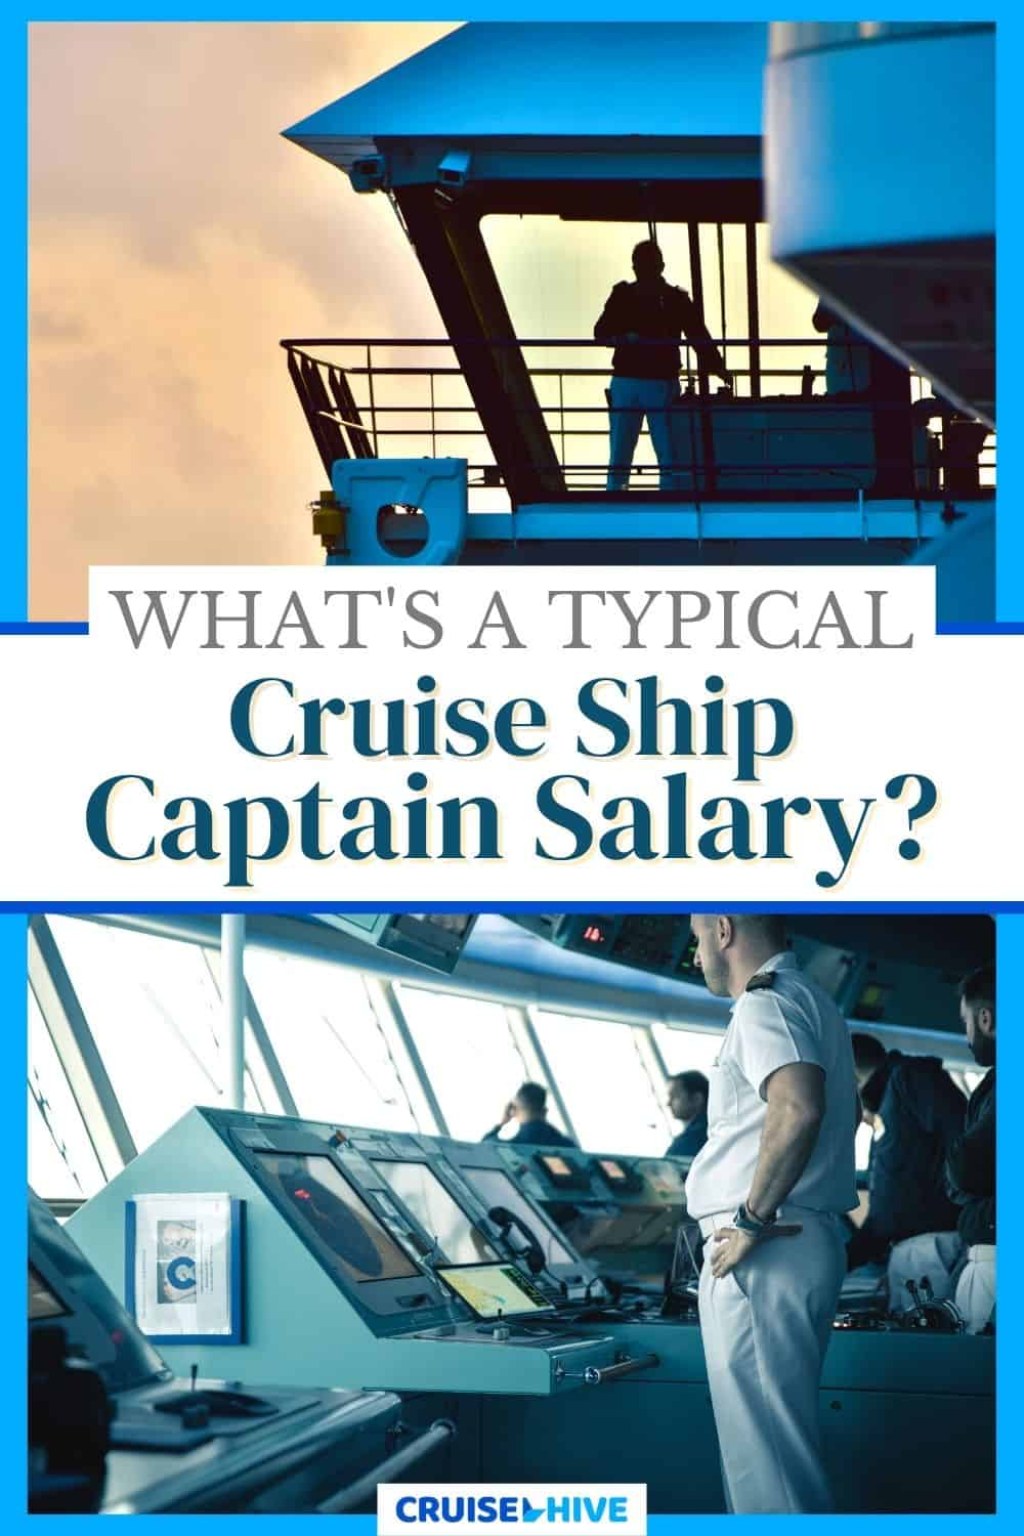 cruise ship captain salary carnival - What